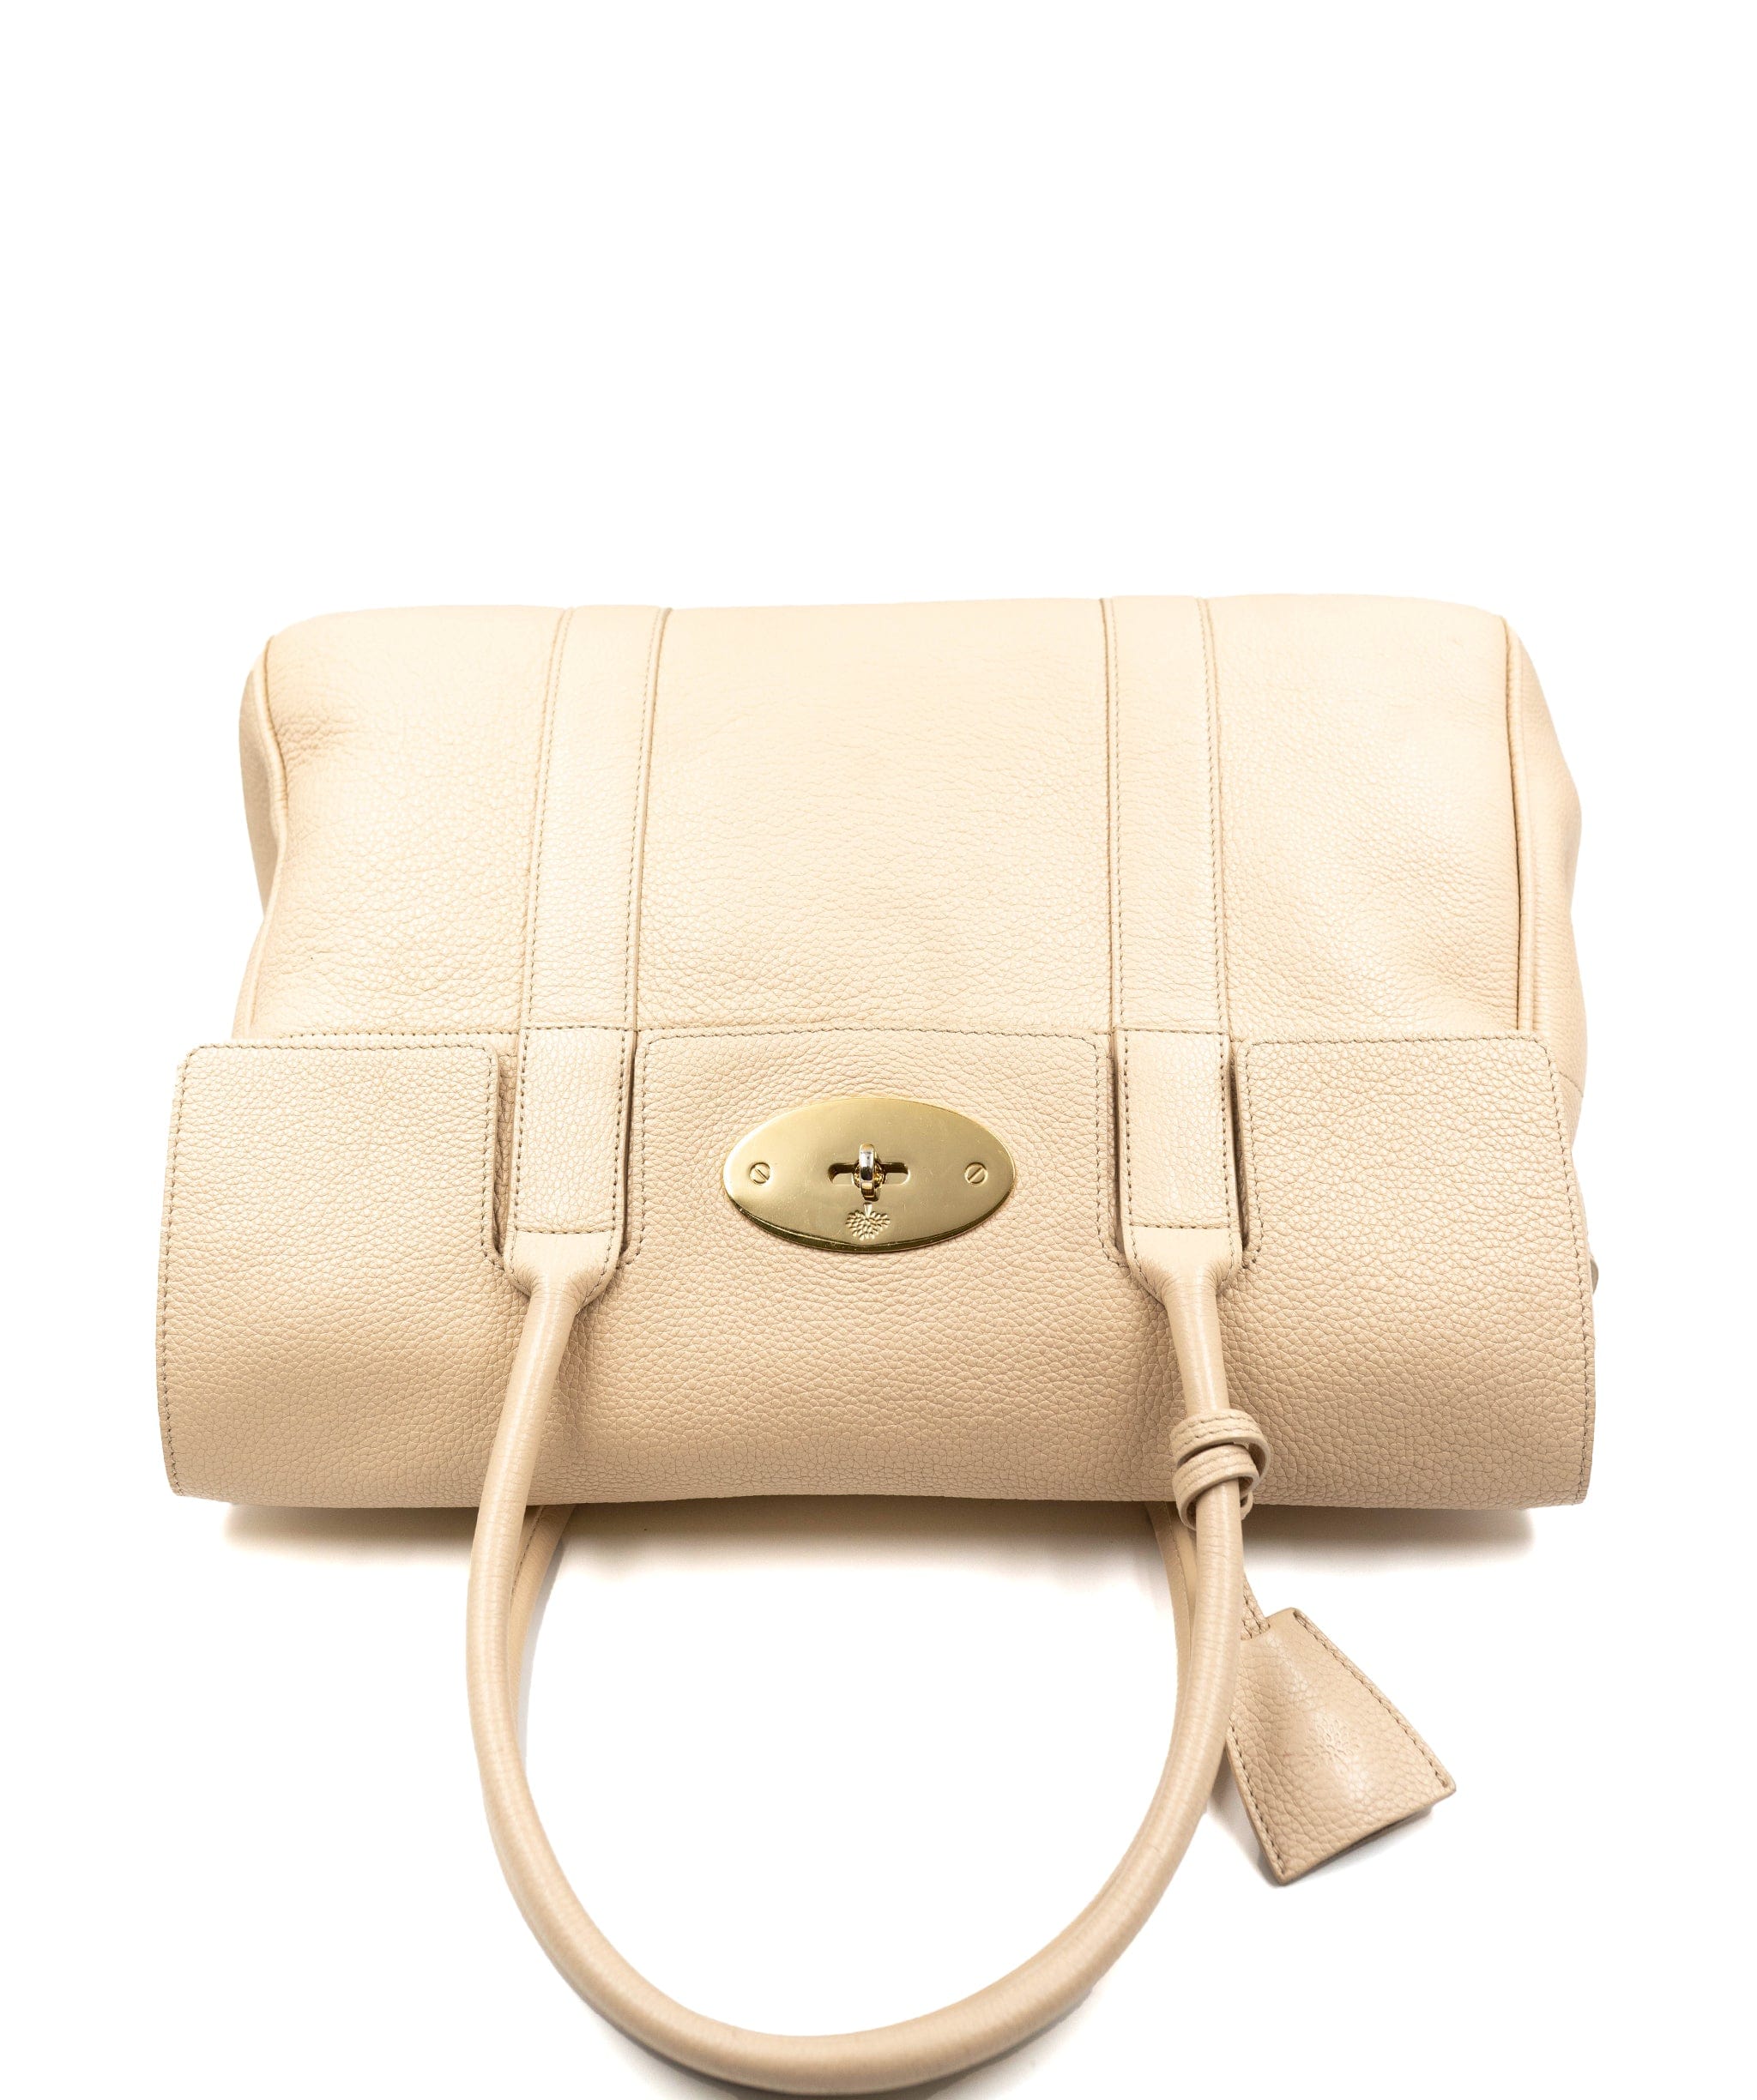 Mulberry Mulberry beige bayswater bag  AGL2331